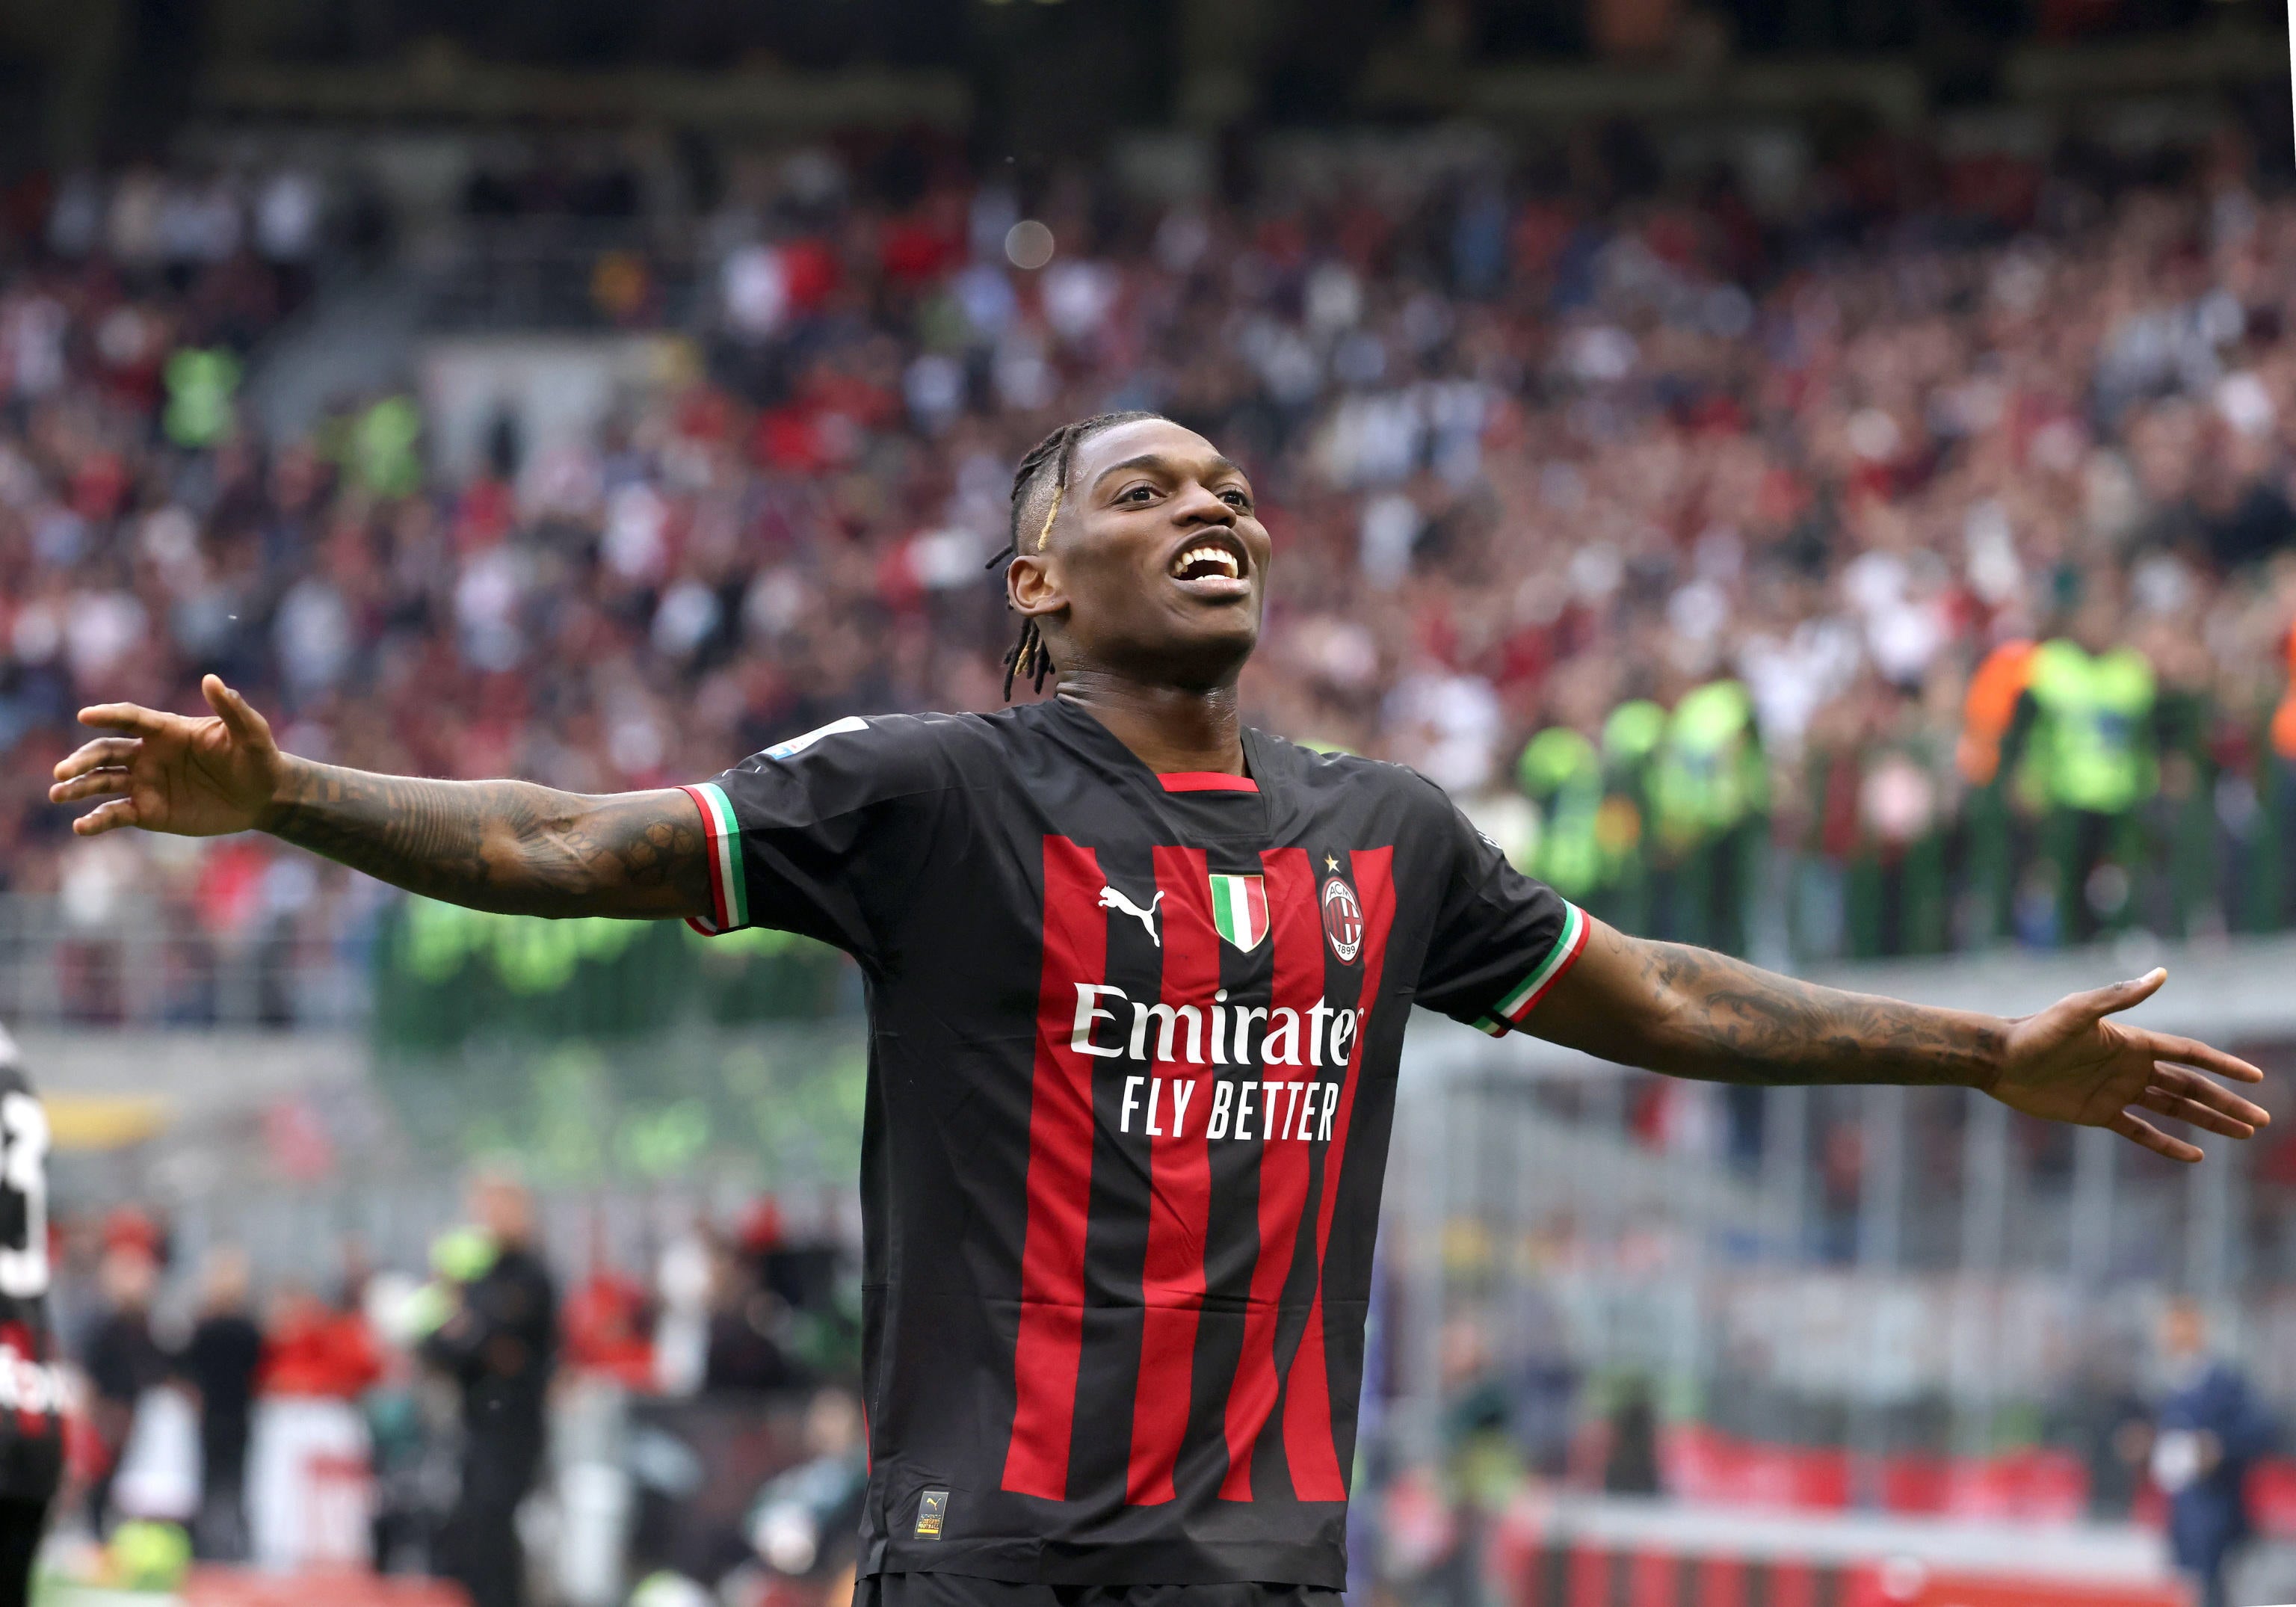 Rafael Leao could give AC Milan an edge in the second leg